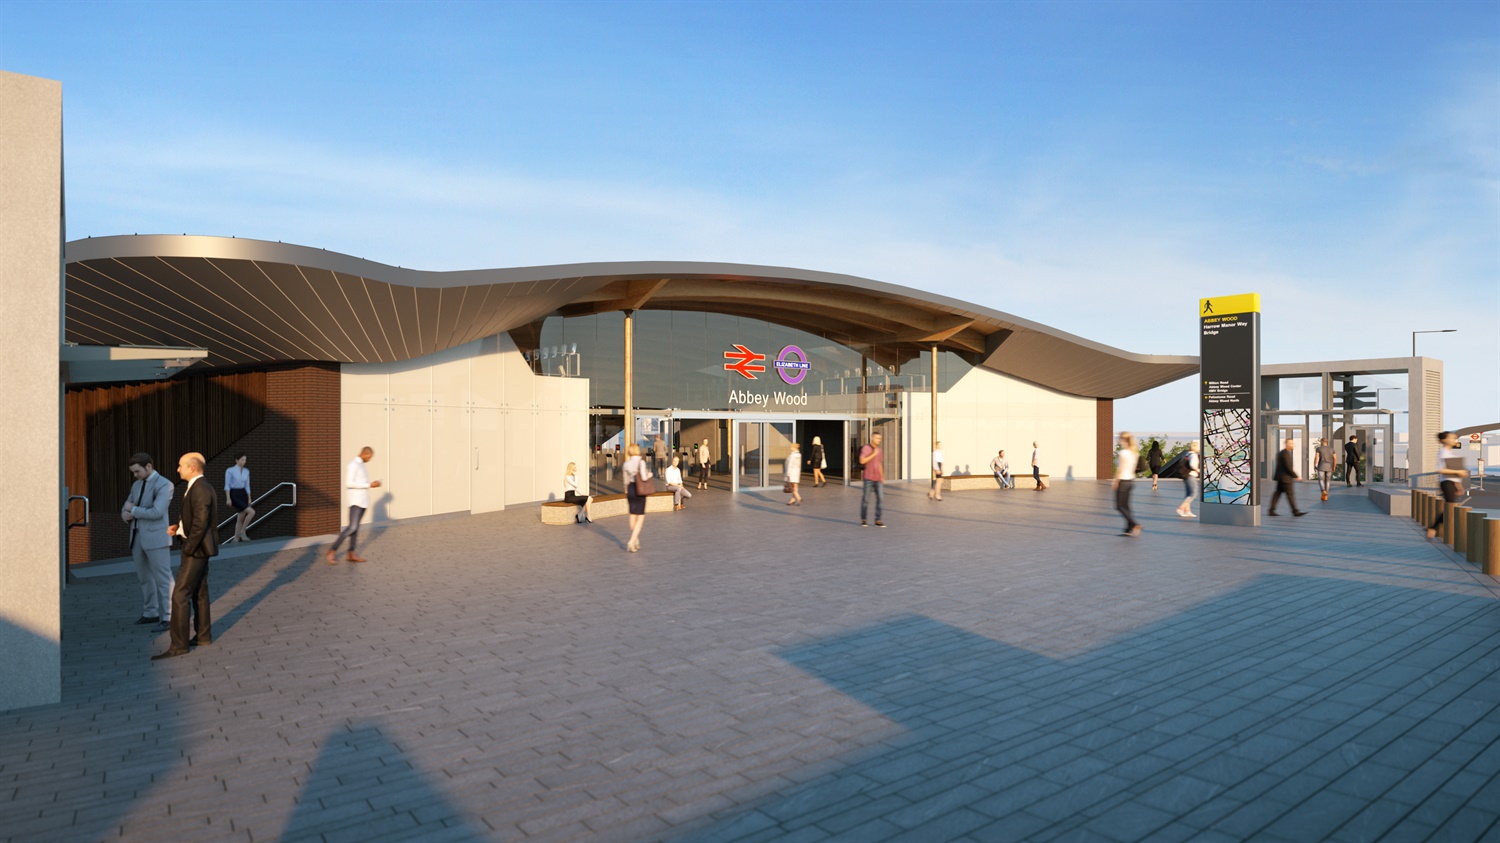 Work moves forward to prepare Abbey Wood station for Crossrail 